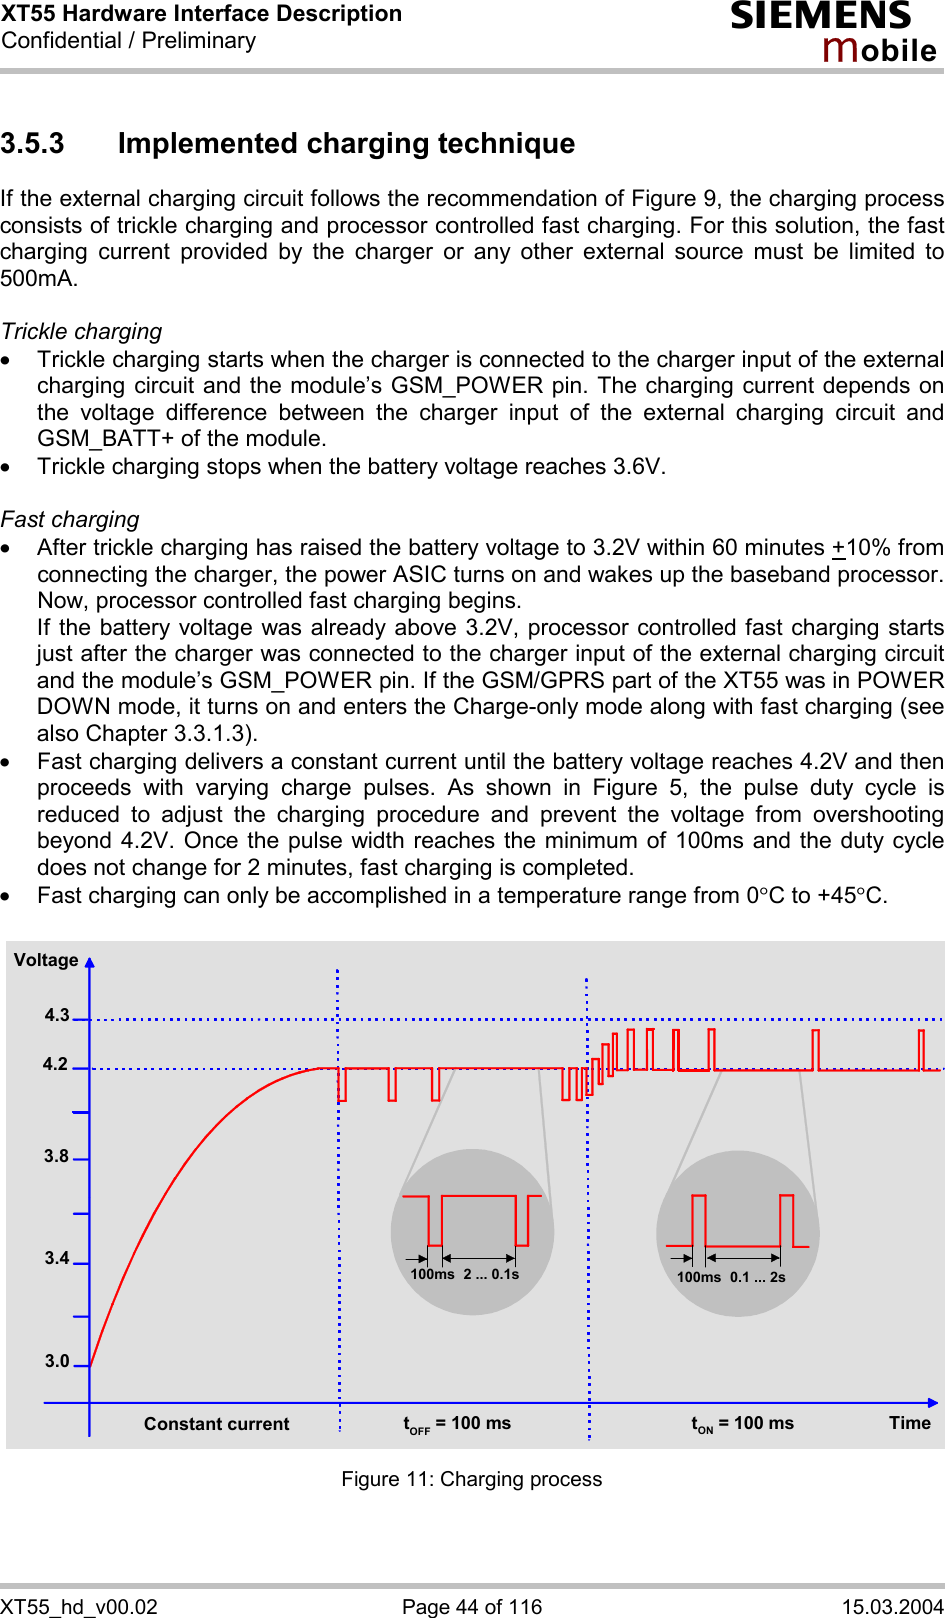 XT55 Hardware Interface Description Confidential / Preliminary s mo b i l e XT55_hd_v00.02  Page 44 of 116  15.03.2004 3.5.3 Implemented charging technique If the external charging circuit follows the recommendation of Figure 9, the charging process consists of trickle charging and processor controlled fast charging. For this solution, the fast charging current provided by the charger or any other external source must be limited to 500mA.   Trickle charging ·  Trickle charging starts when the charger is connected to the charger input of the external charging circuit and the module’s GSM_POWER pin. The charging current depends on the voltage difference between the charger input of the external charging circuit and GSM_BATT+ of the module.  ·  Trickle charging stops when the battery voltage reaches 3.6V.  Fast charging  ·  After trickle charging has raised the battery voltage to 3.2V within 60 minutes +10% from connecting the charger, the power ASIC turns on and wakes up the baseband processor. Now, processor controlled fast charging begins.  If the battery voltage was already above 3.2V, processor controlled fast charging starts just after the charger was connected to the charger input of the external charging circuit and the module’s GSM_POWER pin. If the GSM/GPRS part of the XT55 was in POWER DOWN mode, it turns on and enters the Charge-only mode along with fast charging (see also Chapter 3.3.1.3). ·  Fast charging delivers a constant current until the battery voltage reaches 4.2V and then proceeds with varying charge pulses. As shown in Figure 5, the pulse duty cycle is reduced to adjust the charging procedure and prevent the voltage from overshooting beyond 4.2V. Once the pulse width reaches the minimum of 100ms and the duty cycle does not change for 2 minutes, fast charging is completed. ·  Fast charging can only be accomplished in a temperature range from 0°C to +45°C.  4.34.23.8Voltage3.43.0Constant current tOFF = 100 ms tON = 100 ms Time100ms 2 ... 0.1s 100ms 0.1 ... 2s  Figure 11: Charging process 